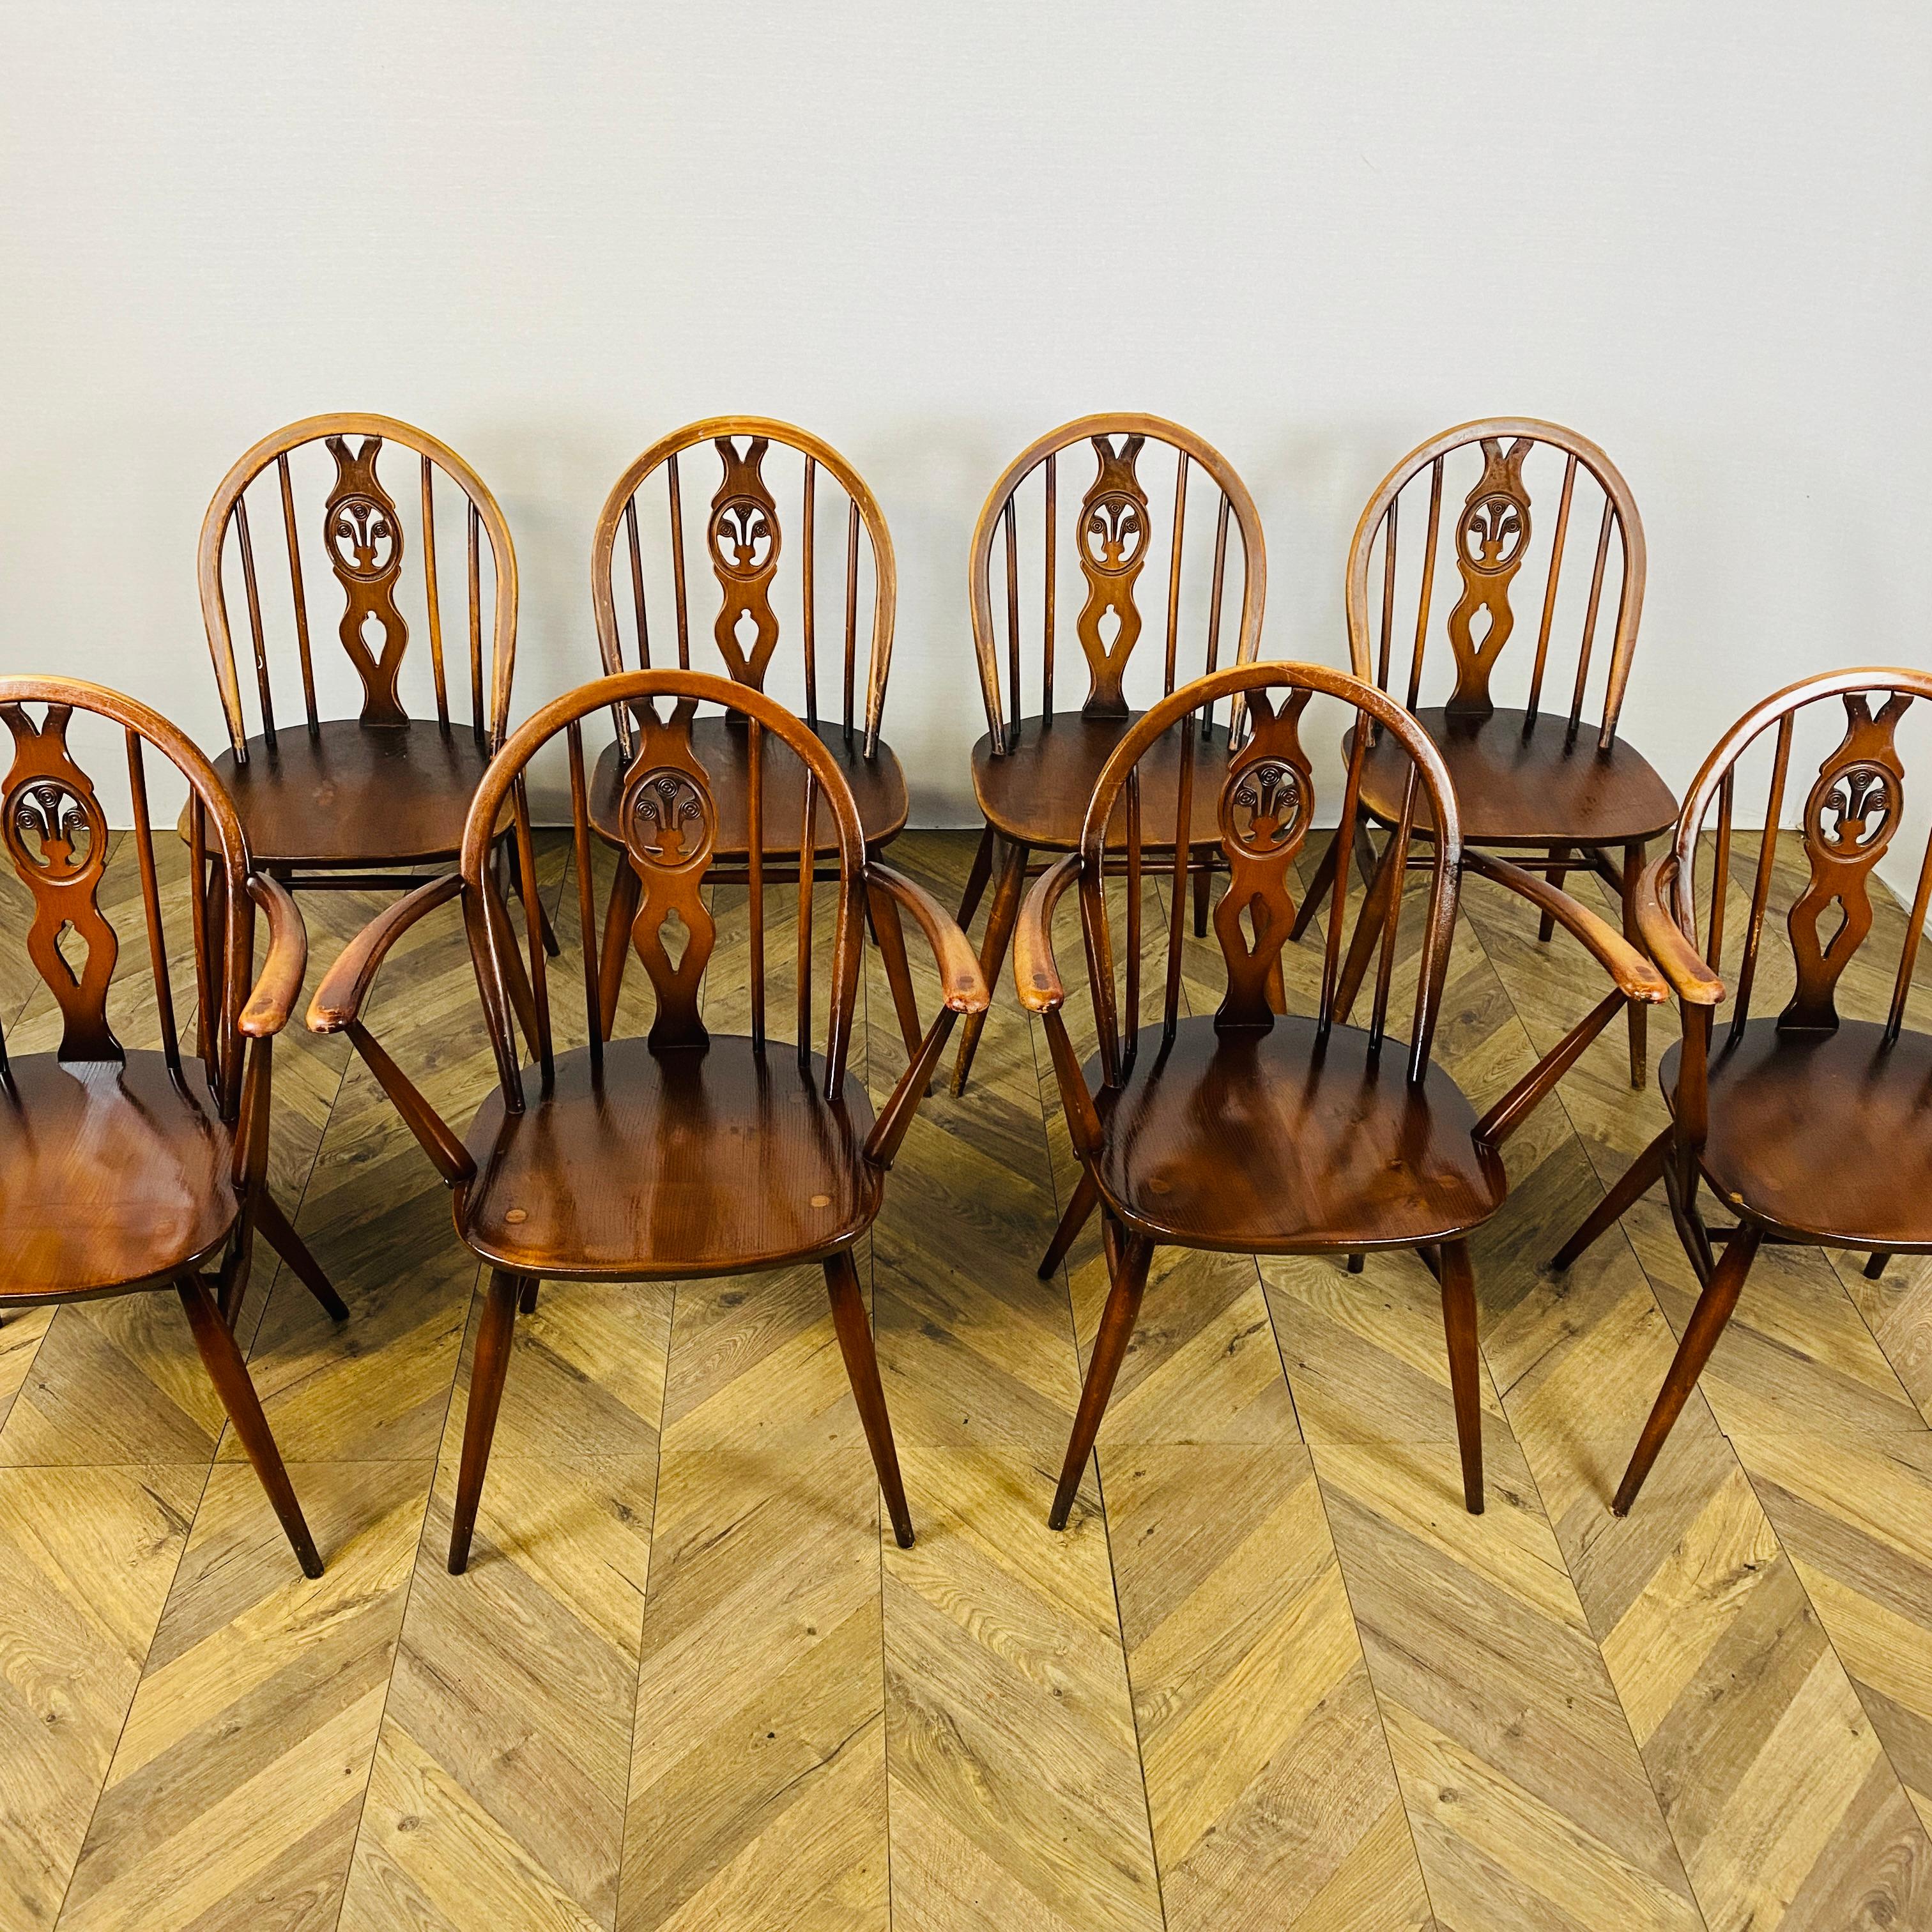 Set of 8, Ercol Windsor Fleur De Lys Chairs, 1960s.

Designed by Lucian Ercolani, the Fleur De Lys chairs seamlessly blend contemporary British design and traditional craftsmanship. 

The chairs are made from solid beech with elm seats and boast